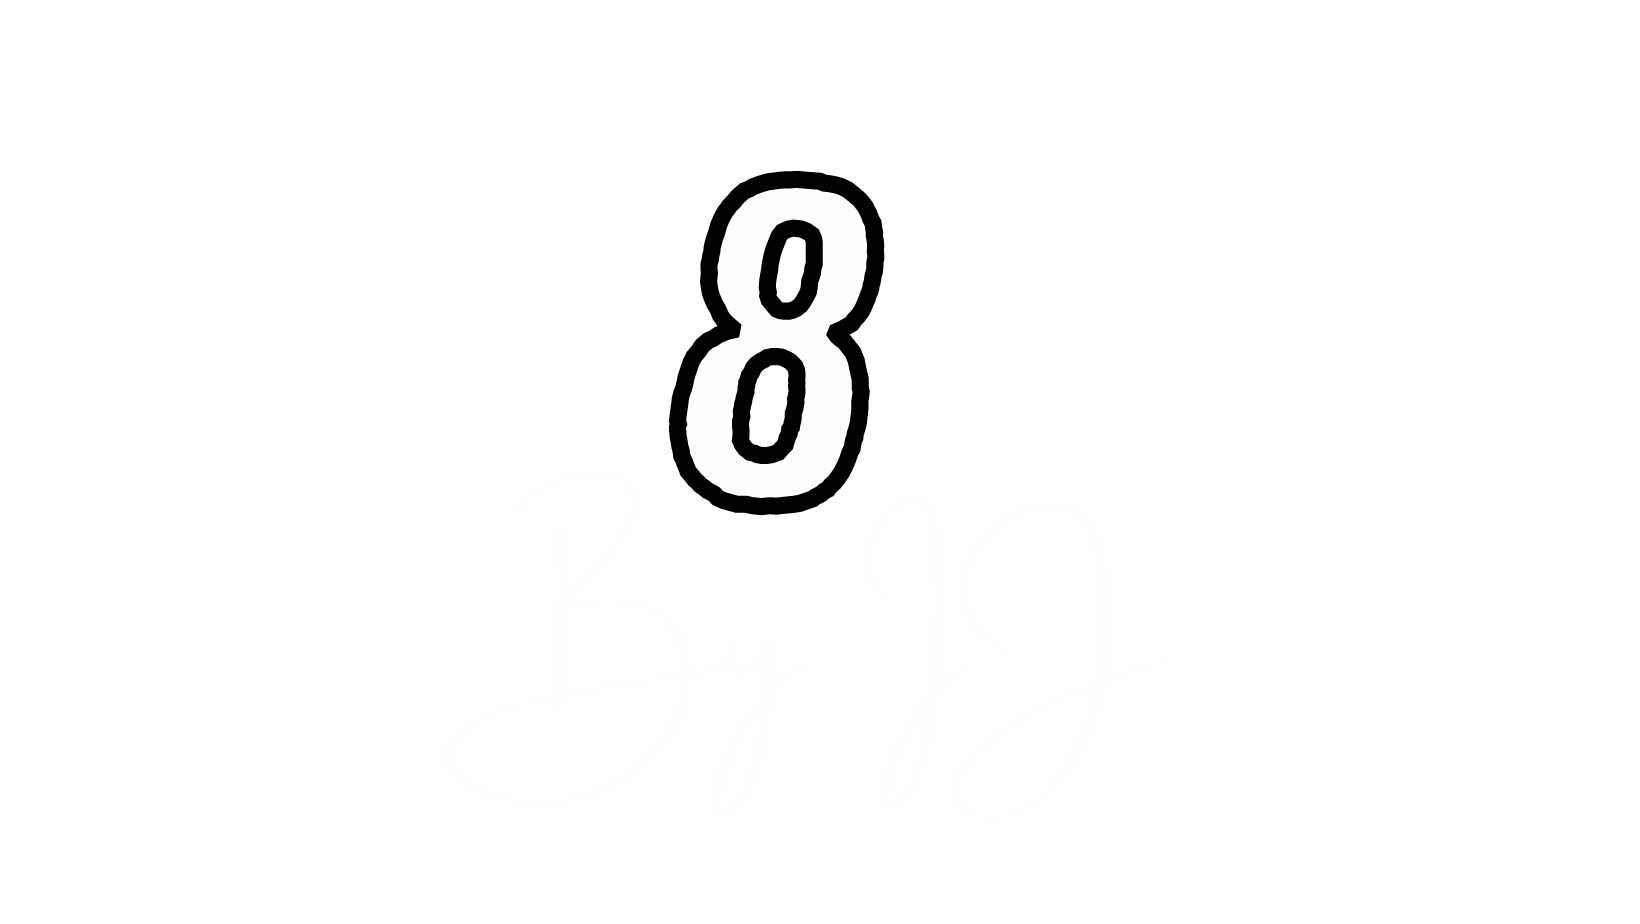 8 by IJ